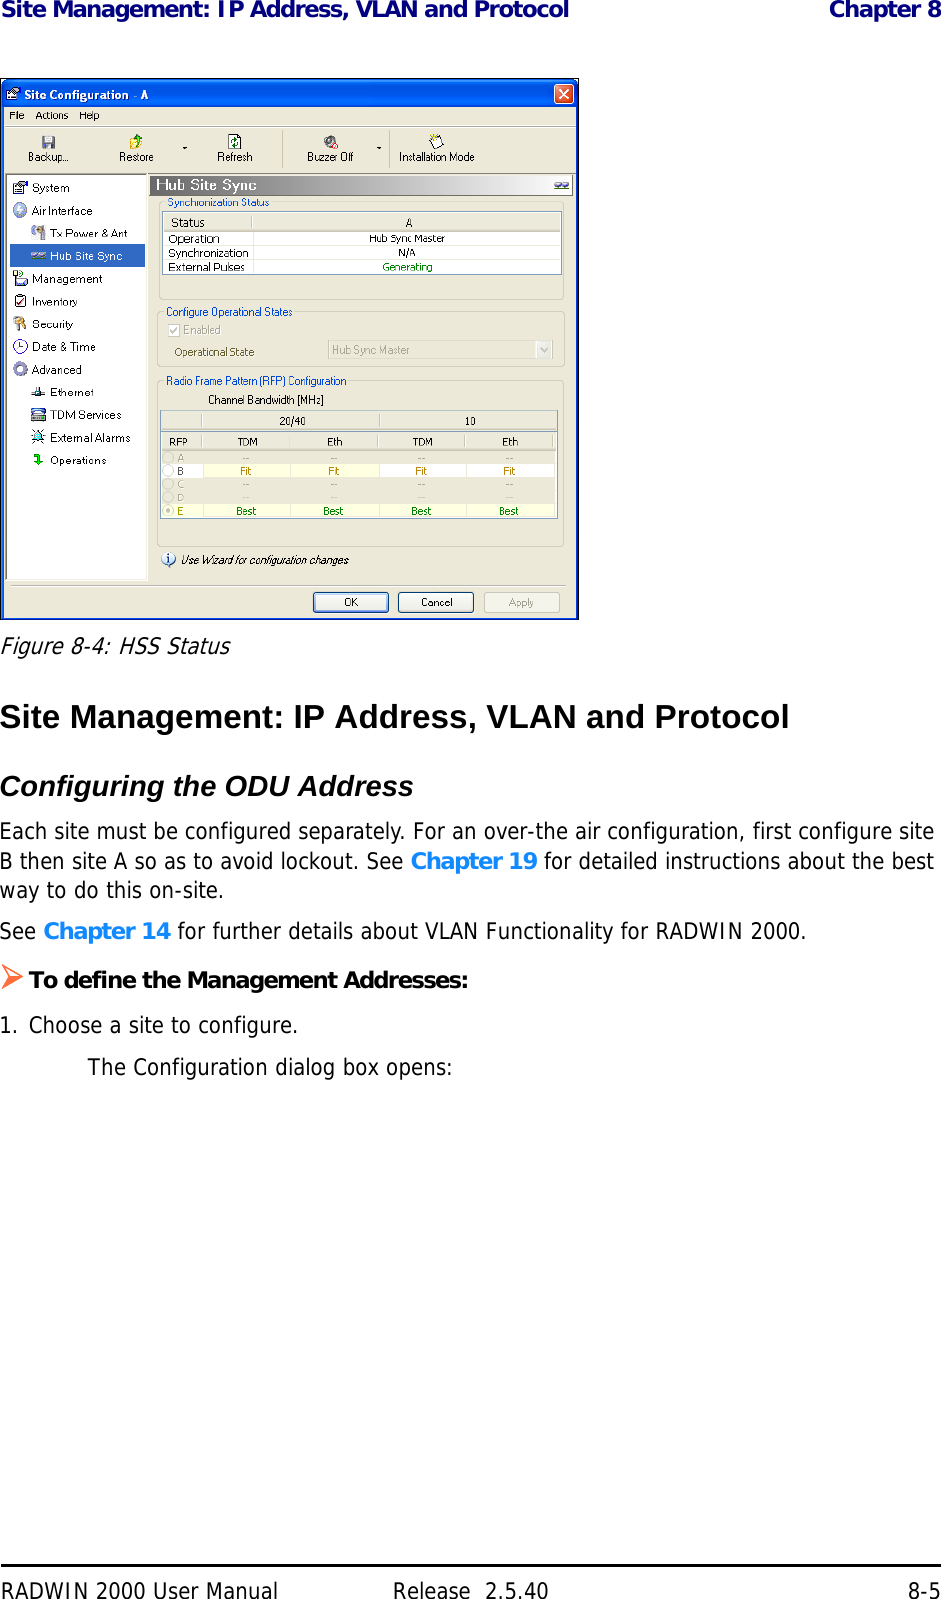 Site Management: IP Address, VLAN and Protocol Chapter 8RADWIN 2000 User Manual Release  2.5.40 8-5Figure 8-4: HSS StatusSite Management: IP Address, VLAN and ProtocolConfiguring the ODU AddressEach site must be configured separately. For an over-the air configuration, first configure site B then site A so as to avoid lockout. See Chapter 19 for detailed instructions about the best way to do this on-site.See Chapter 14 for further details about VLAN Functionality for RADWIN 2000.To define the Management Addresses:1. Choose a site to configure.The Configuration dialog box opens: